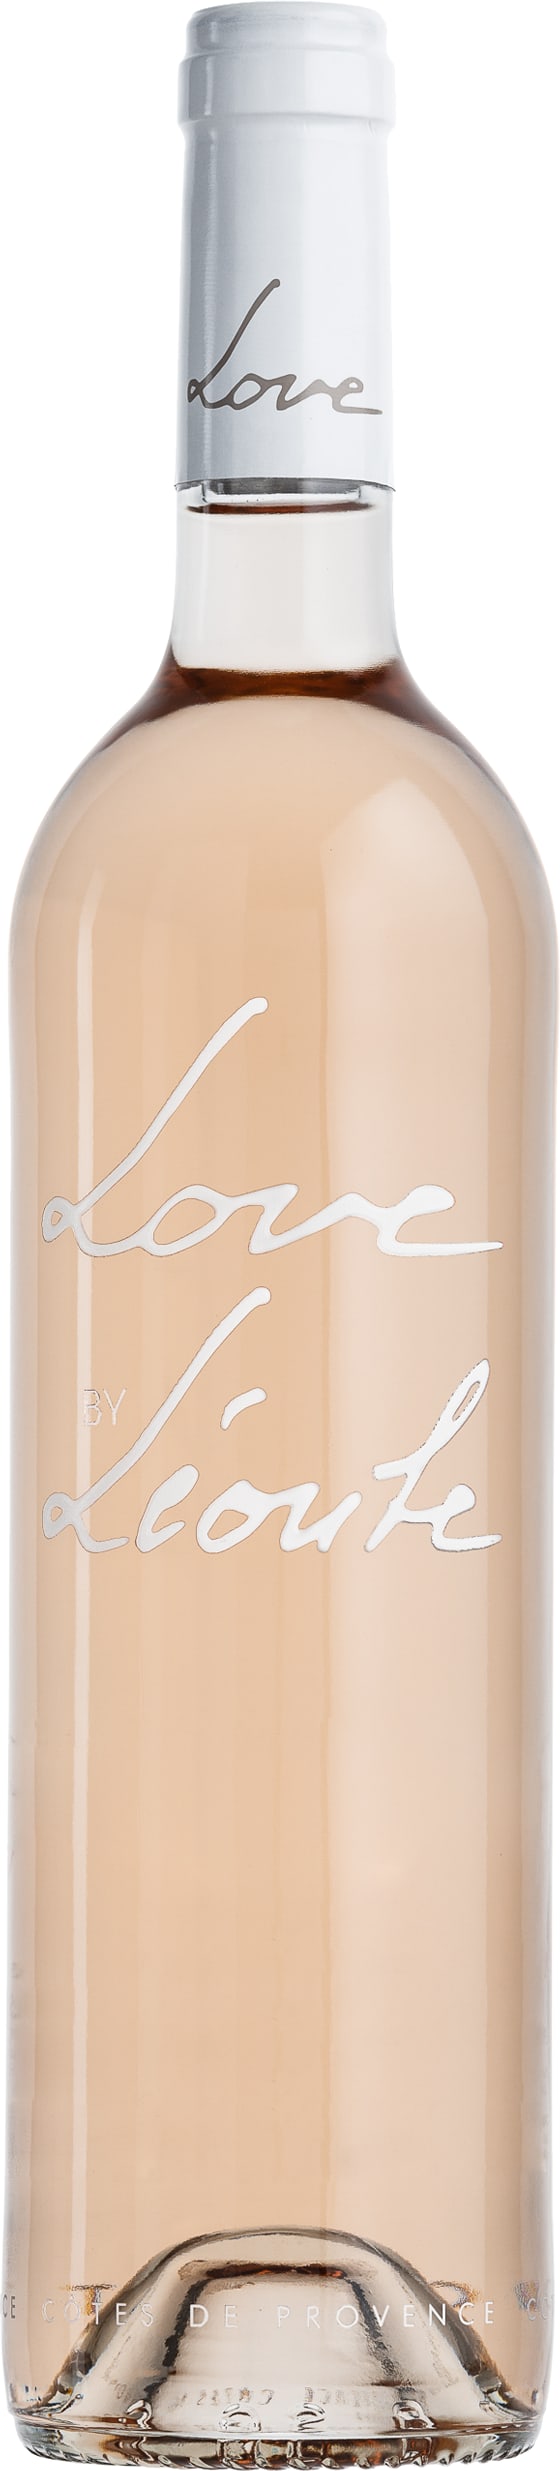 Chateau Leoube Love by Leoube Organic Rose 2020 6x75cl - Just Wines 